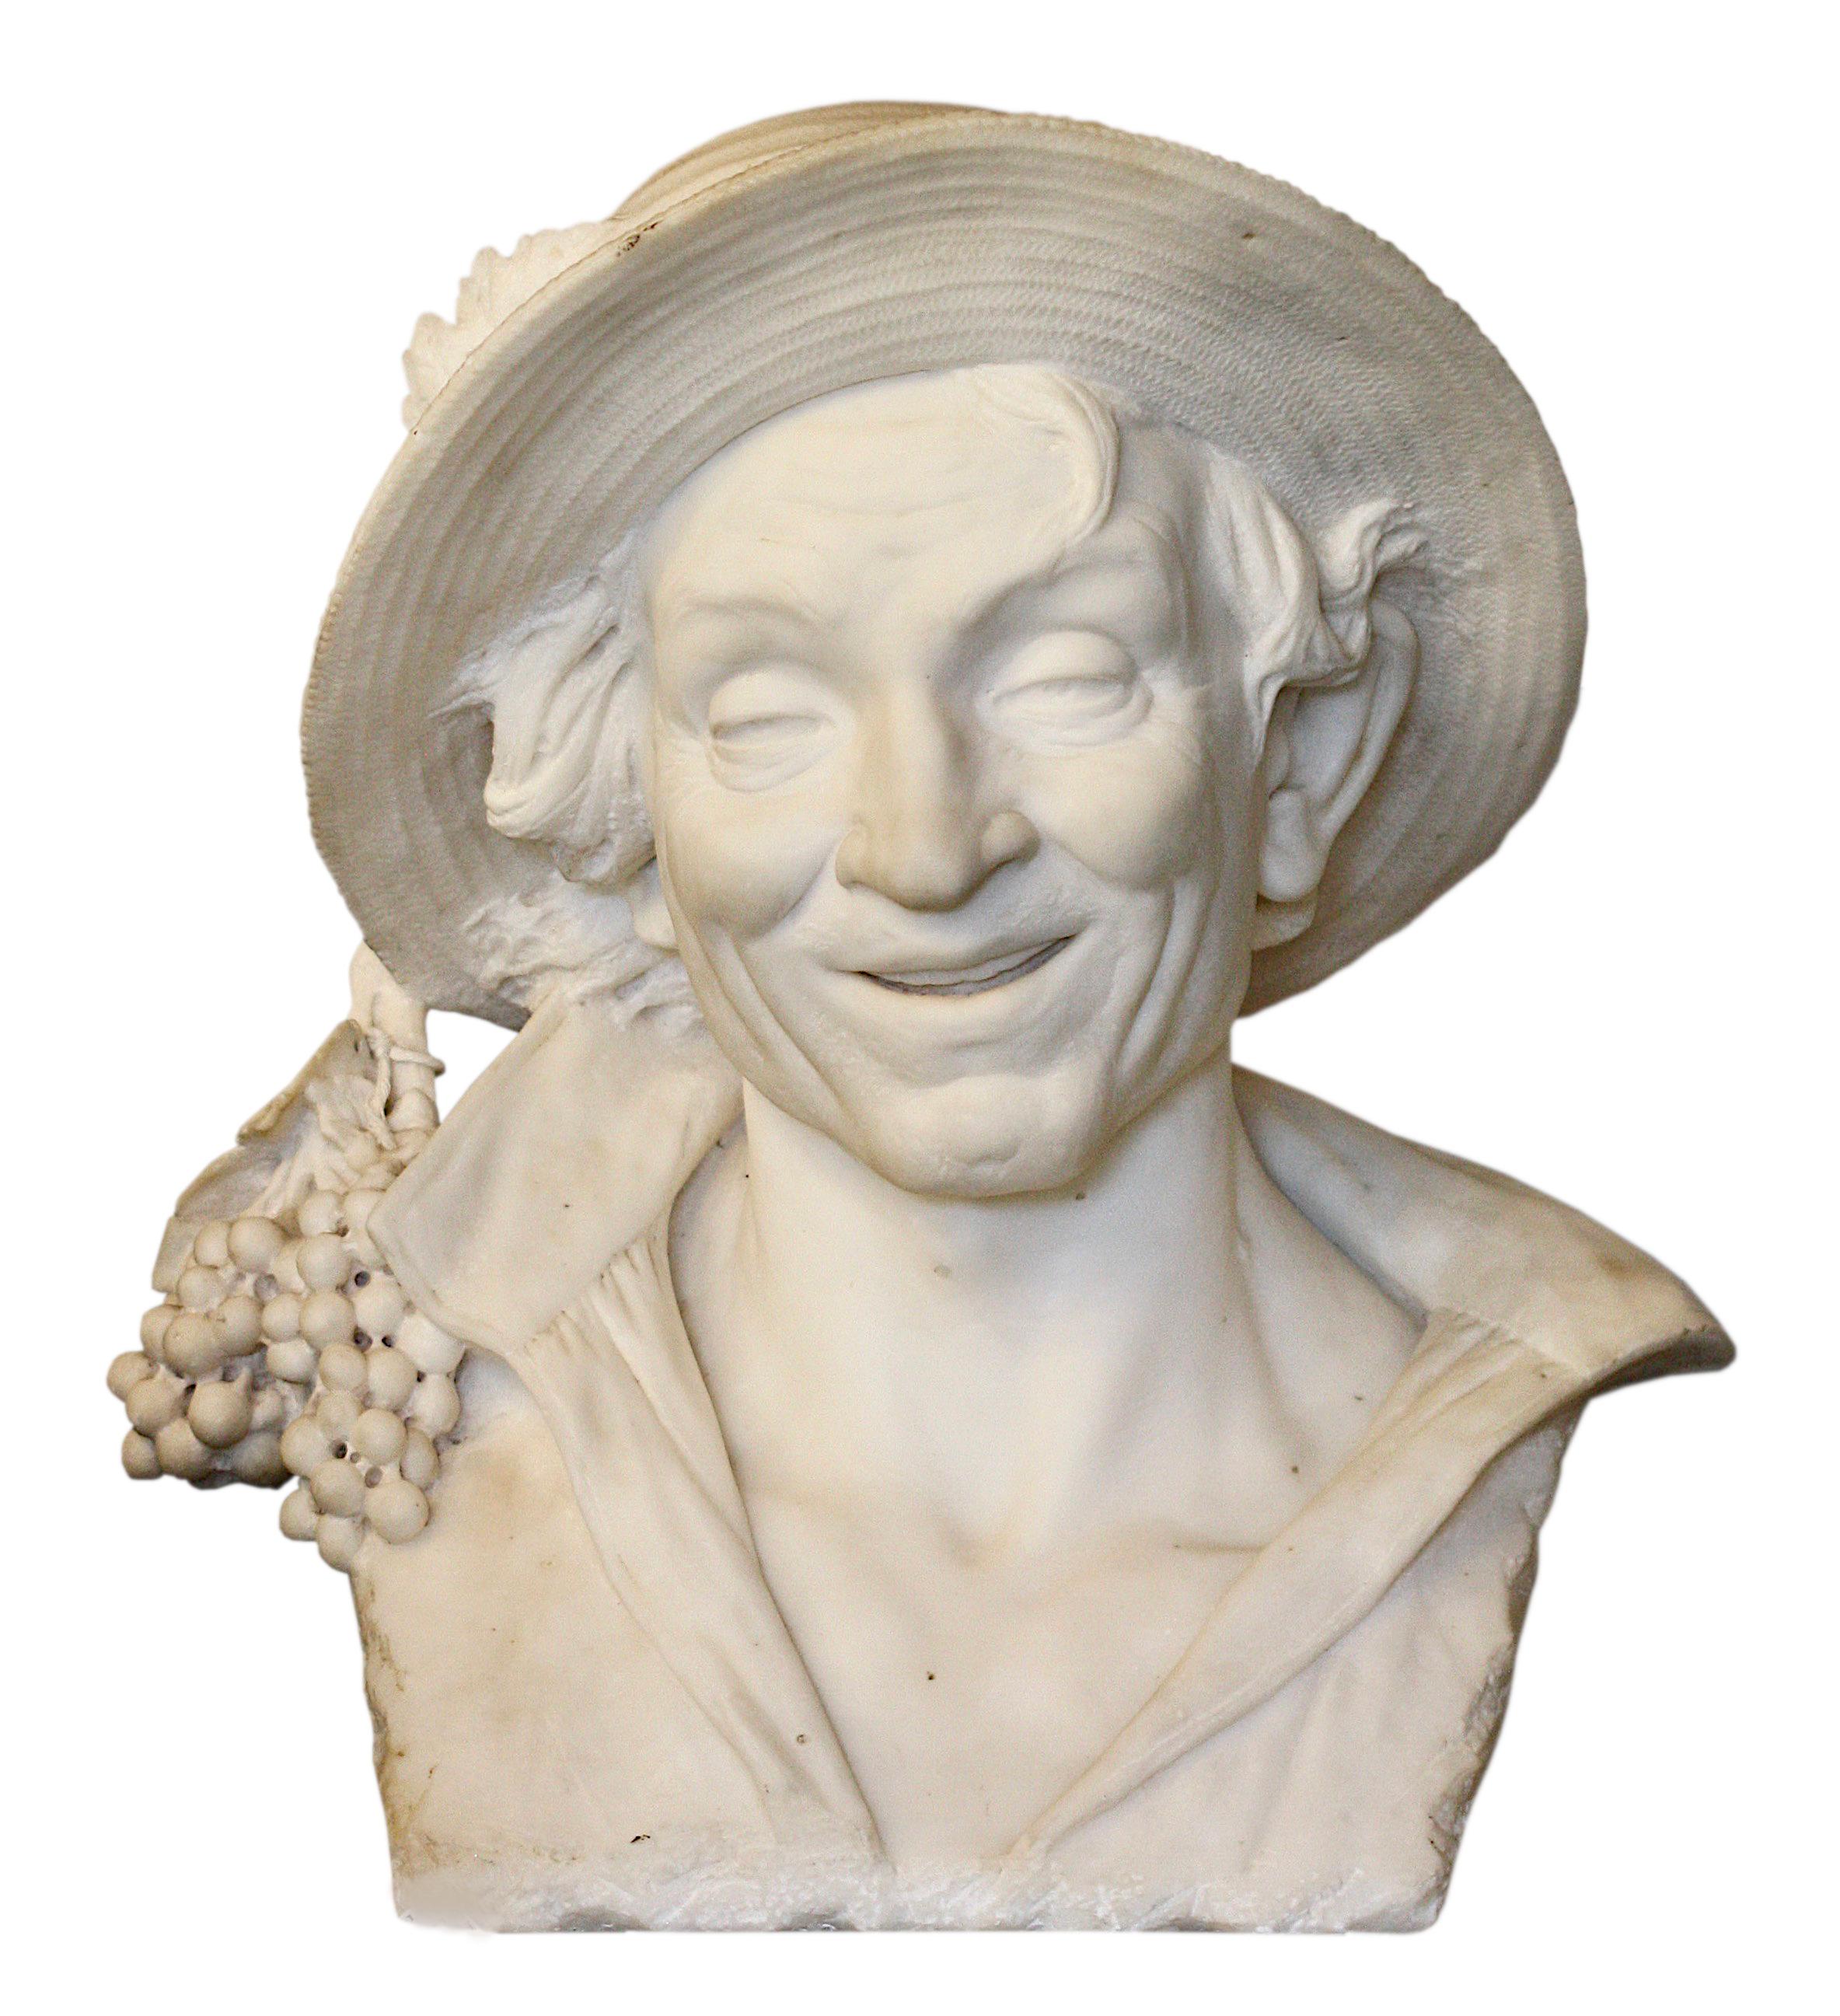 An Italian carved white marble bust
Finely carved, depicted is an inebriated jolly Man wearing an open shirt with grapes hanging from his straw hat
Measures: height 20 in. (50.8 cm.) 
Width 17 in. (43.12 cm.) 
Depth 12 in. (30.48 cm.)